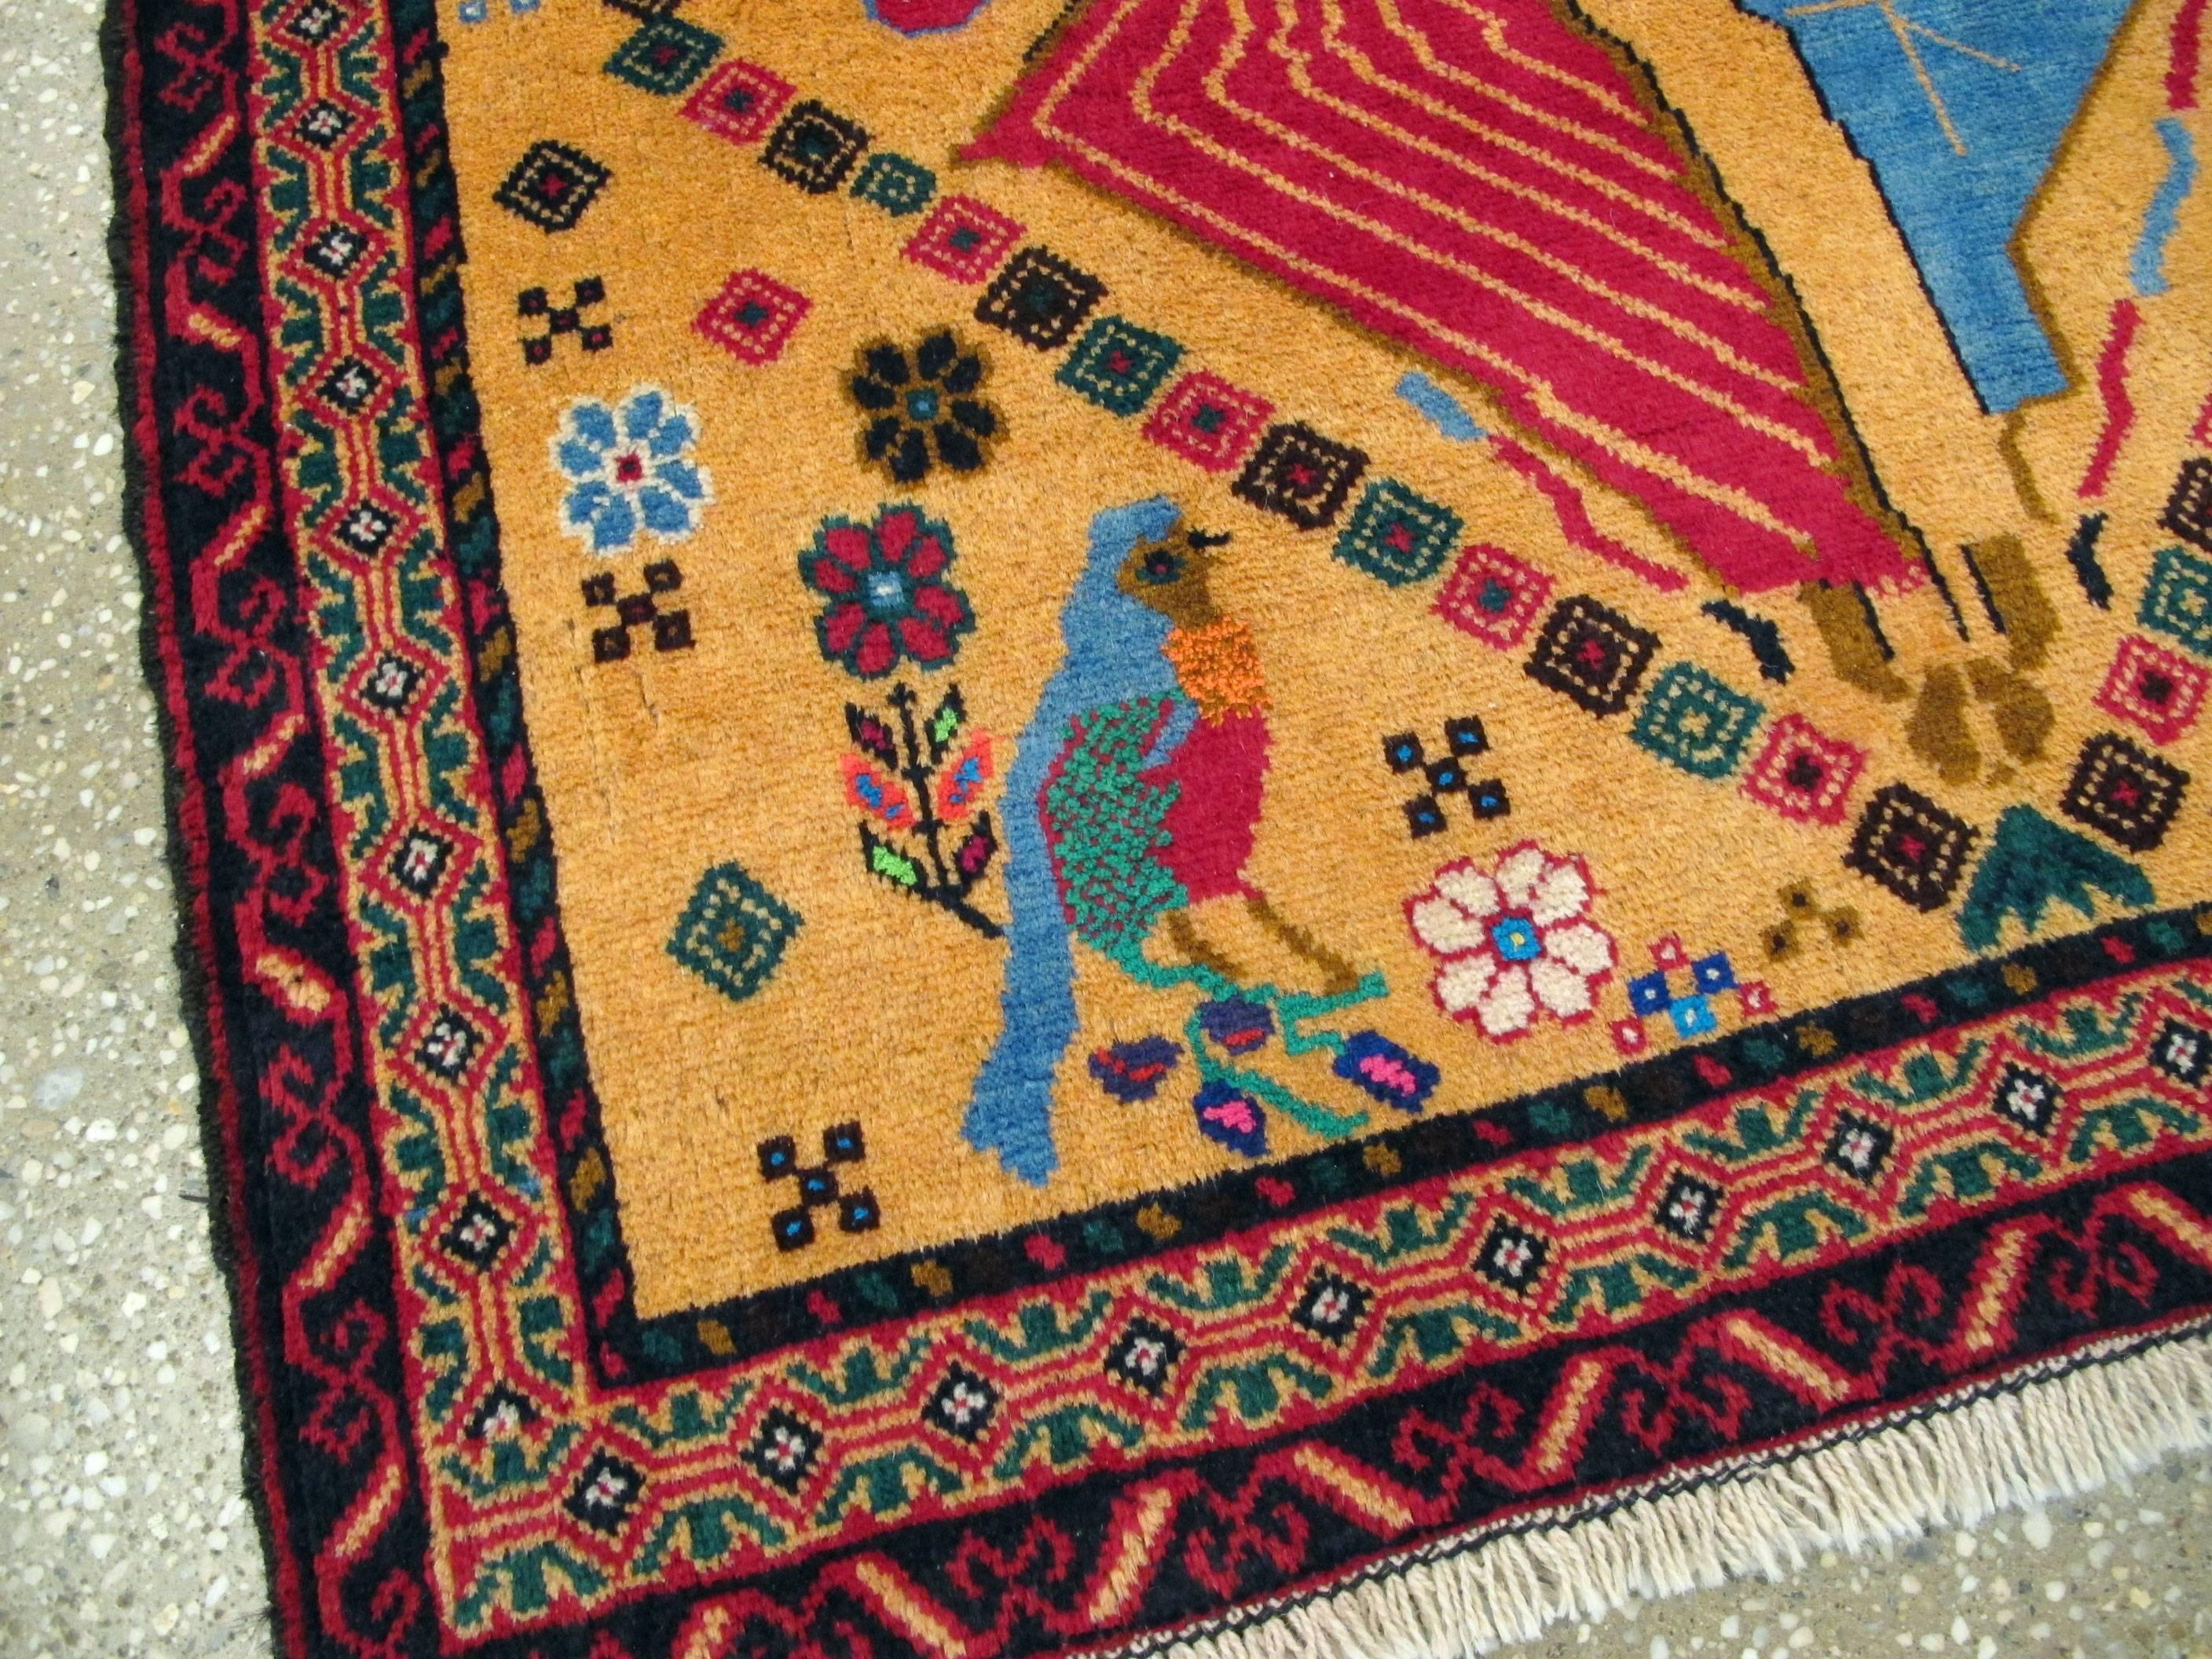 20th Century Vintage Persian Baluch Rug For Sale